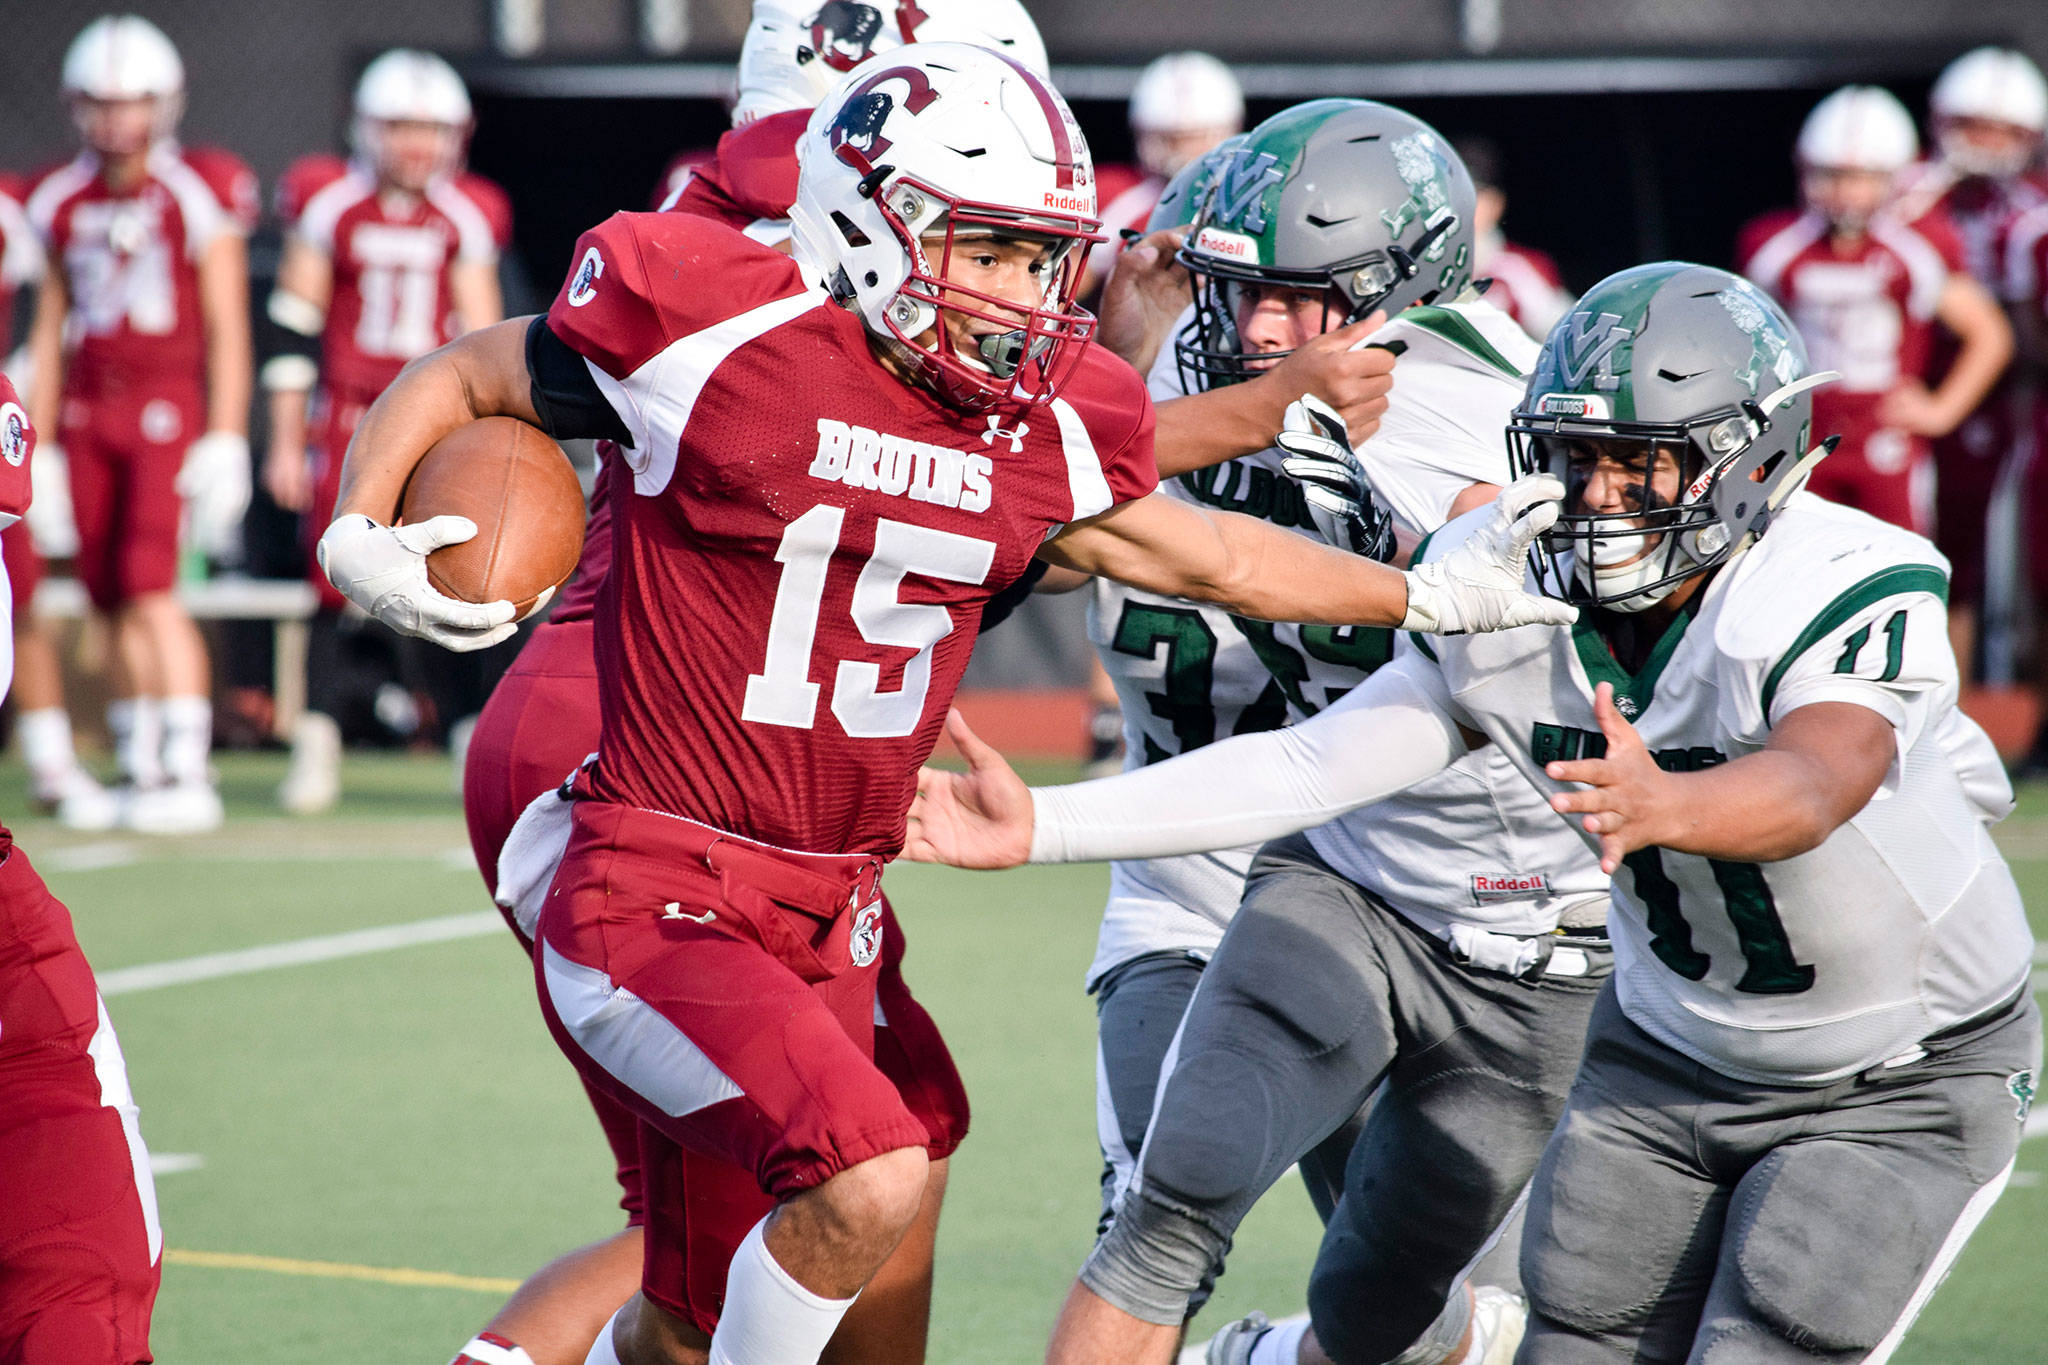 Davanta Murphy-Mcmillan ran for 313 yards and four touchdowns in Cascade’s double-overtime loss to Mount Vernon. (Katie Webber / The Herald)